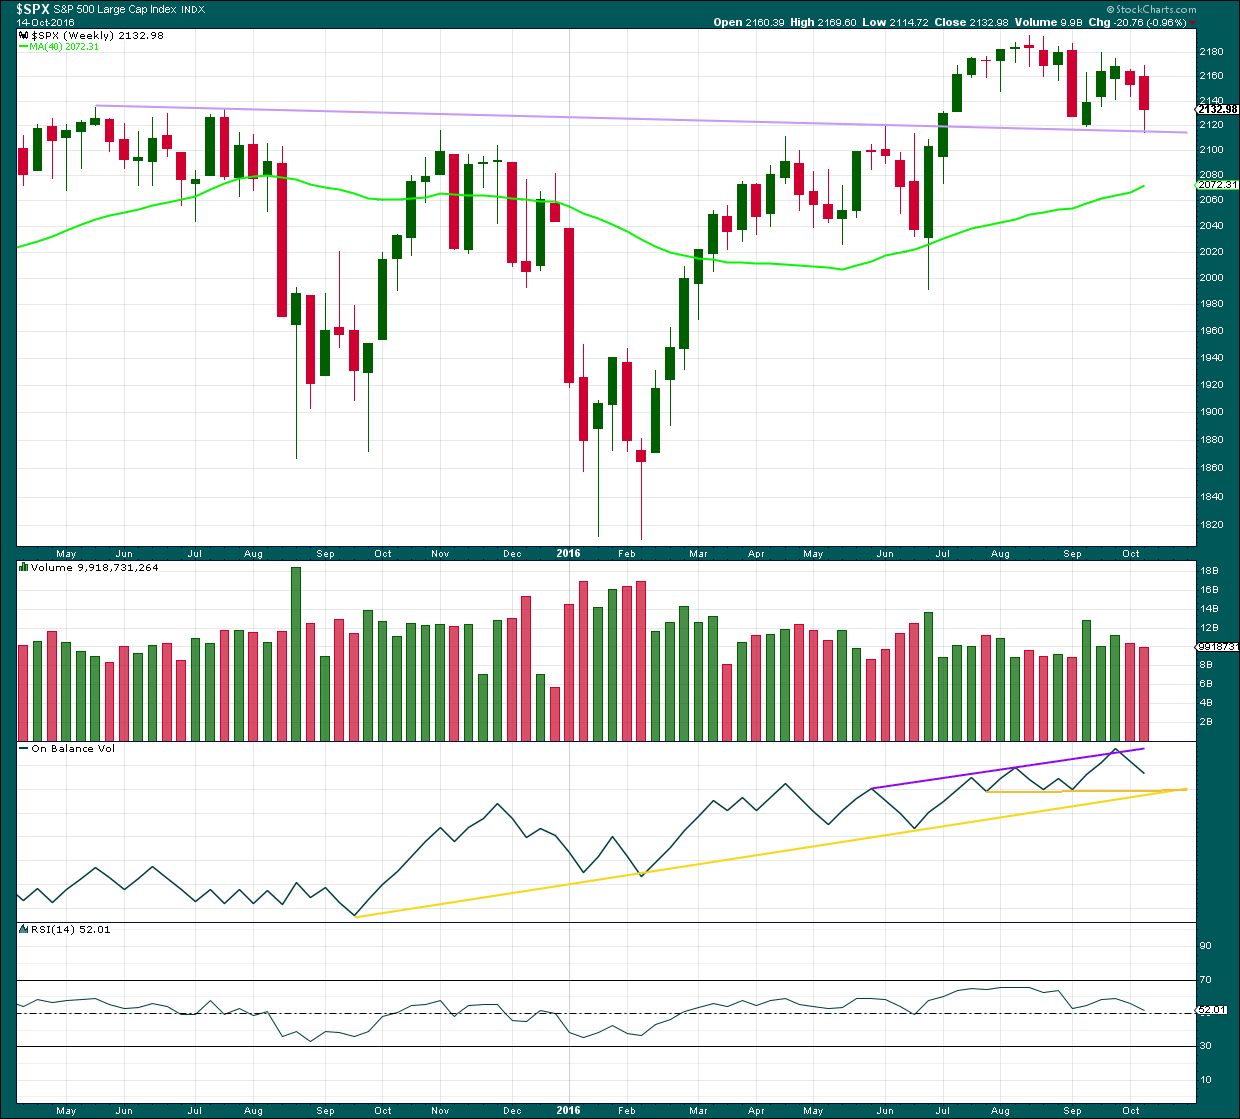 S&P 500 weekly 2016